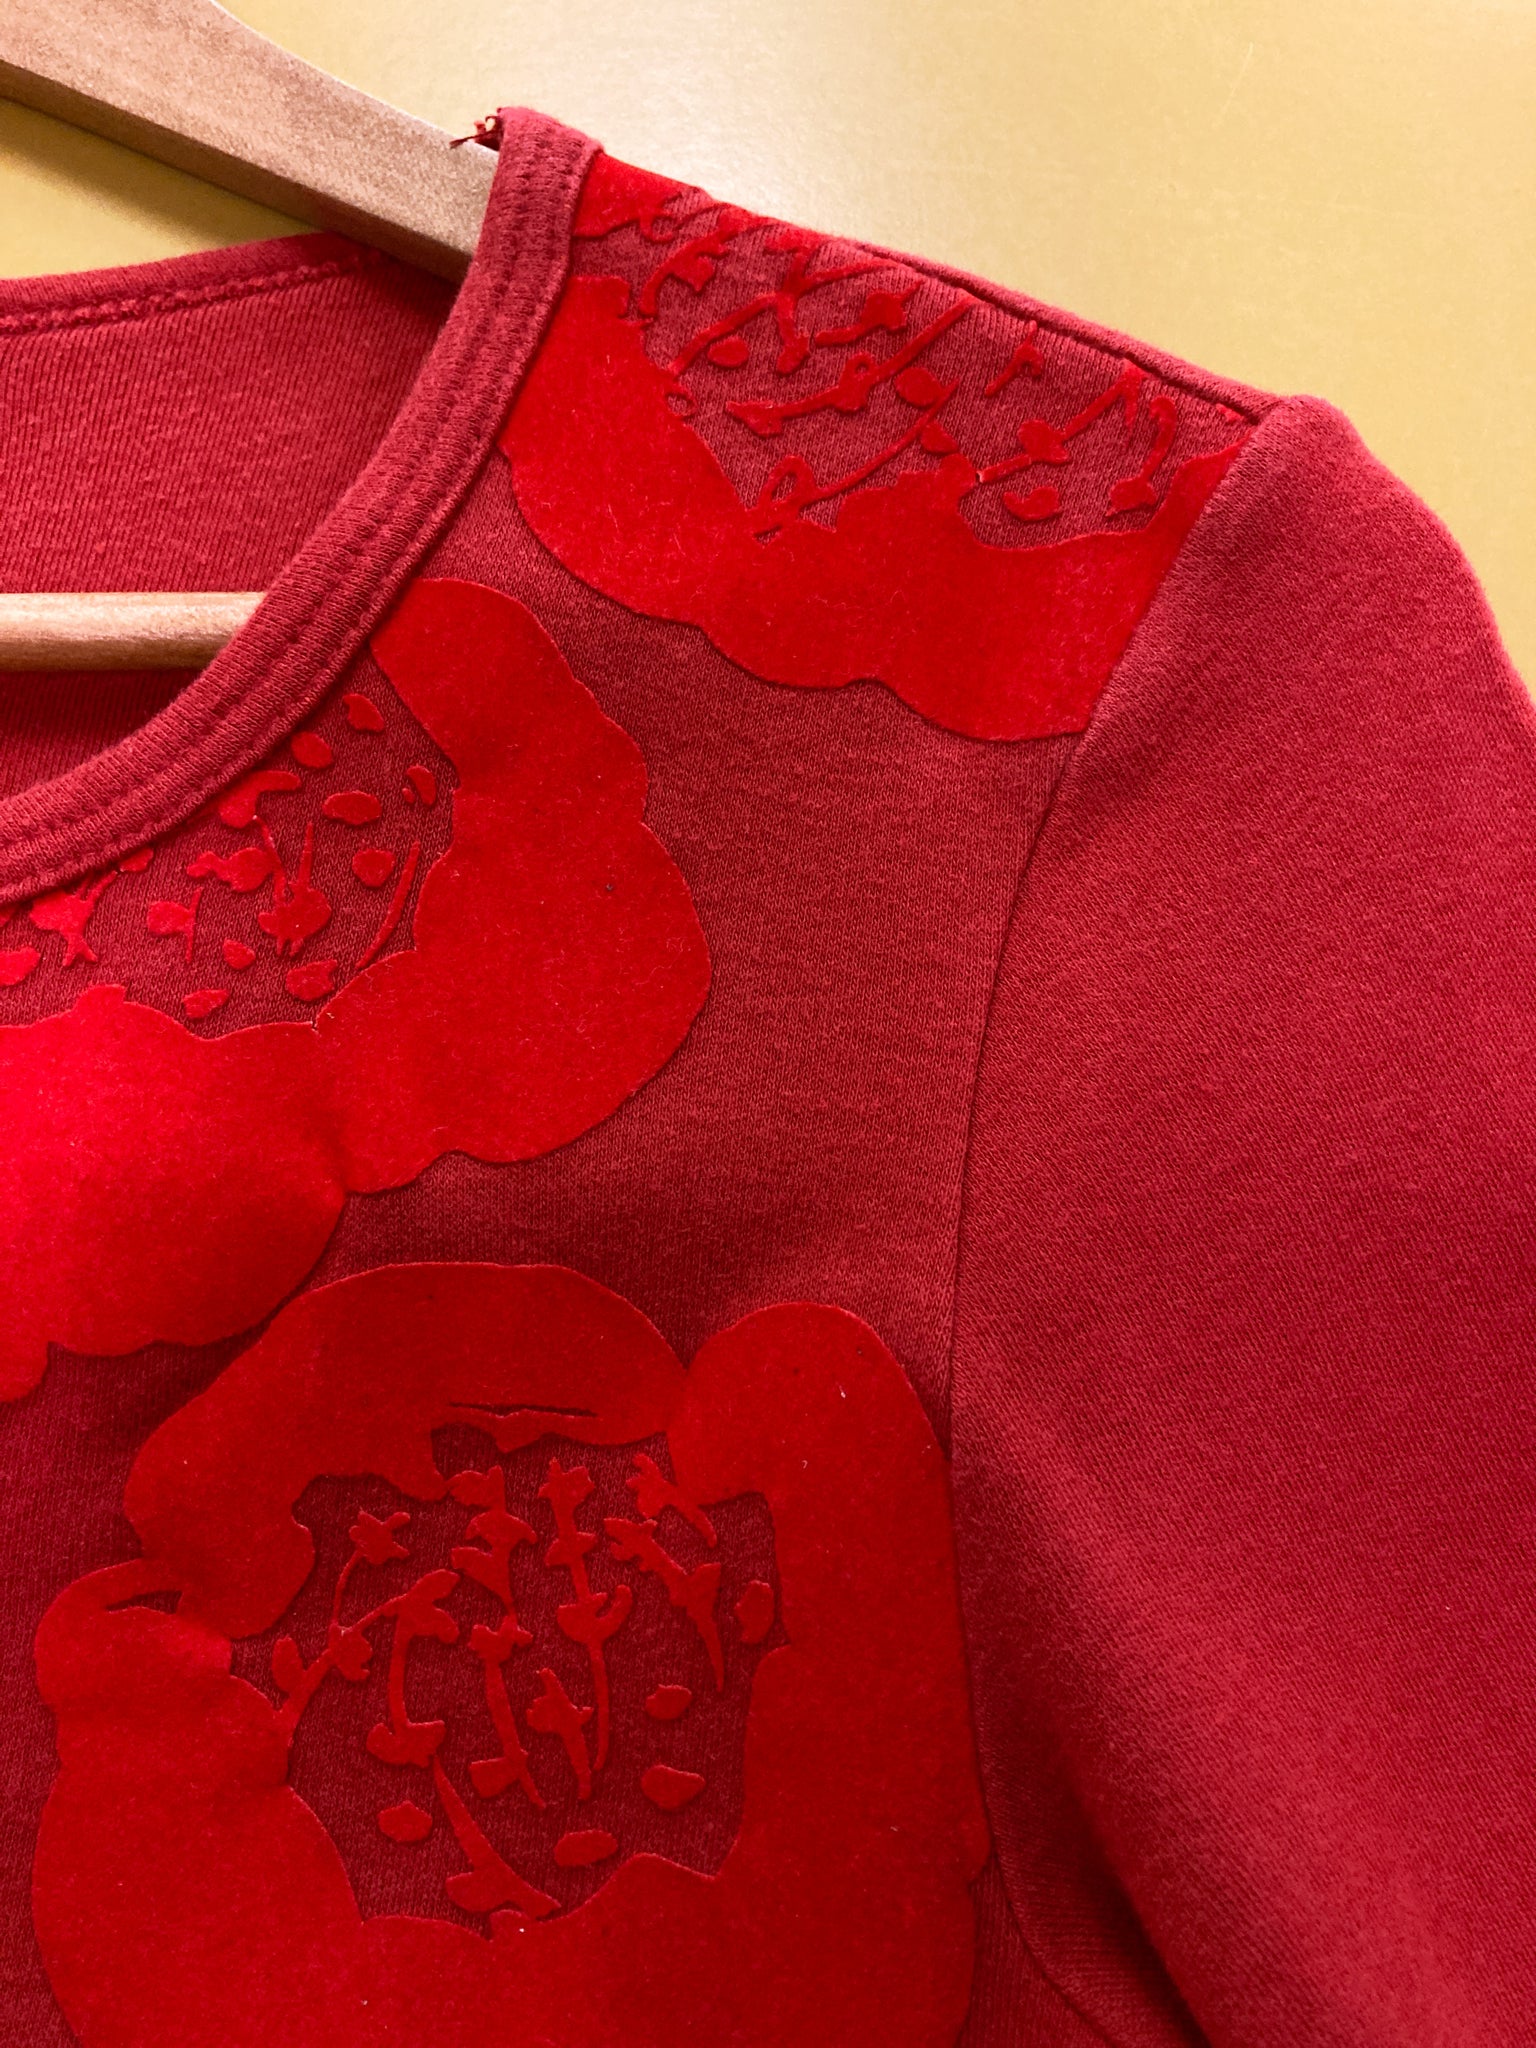 Comme des Garcons AW1996 red cotton top with brushed flower applique